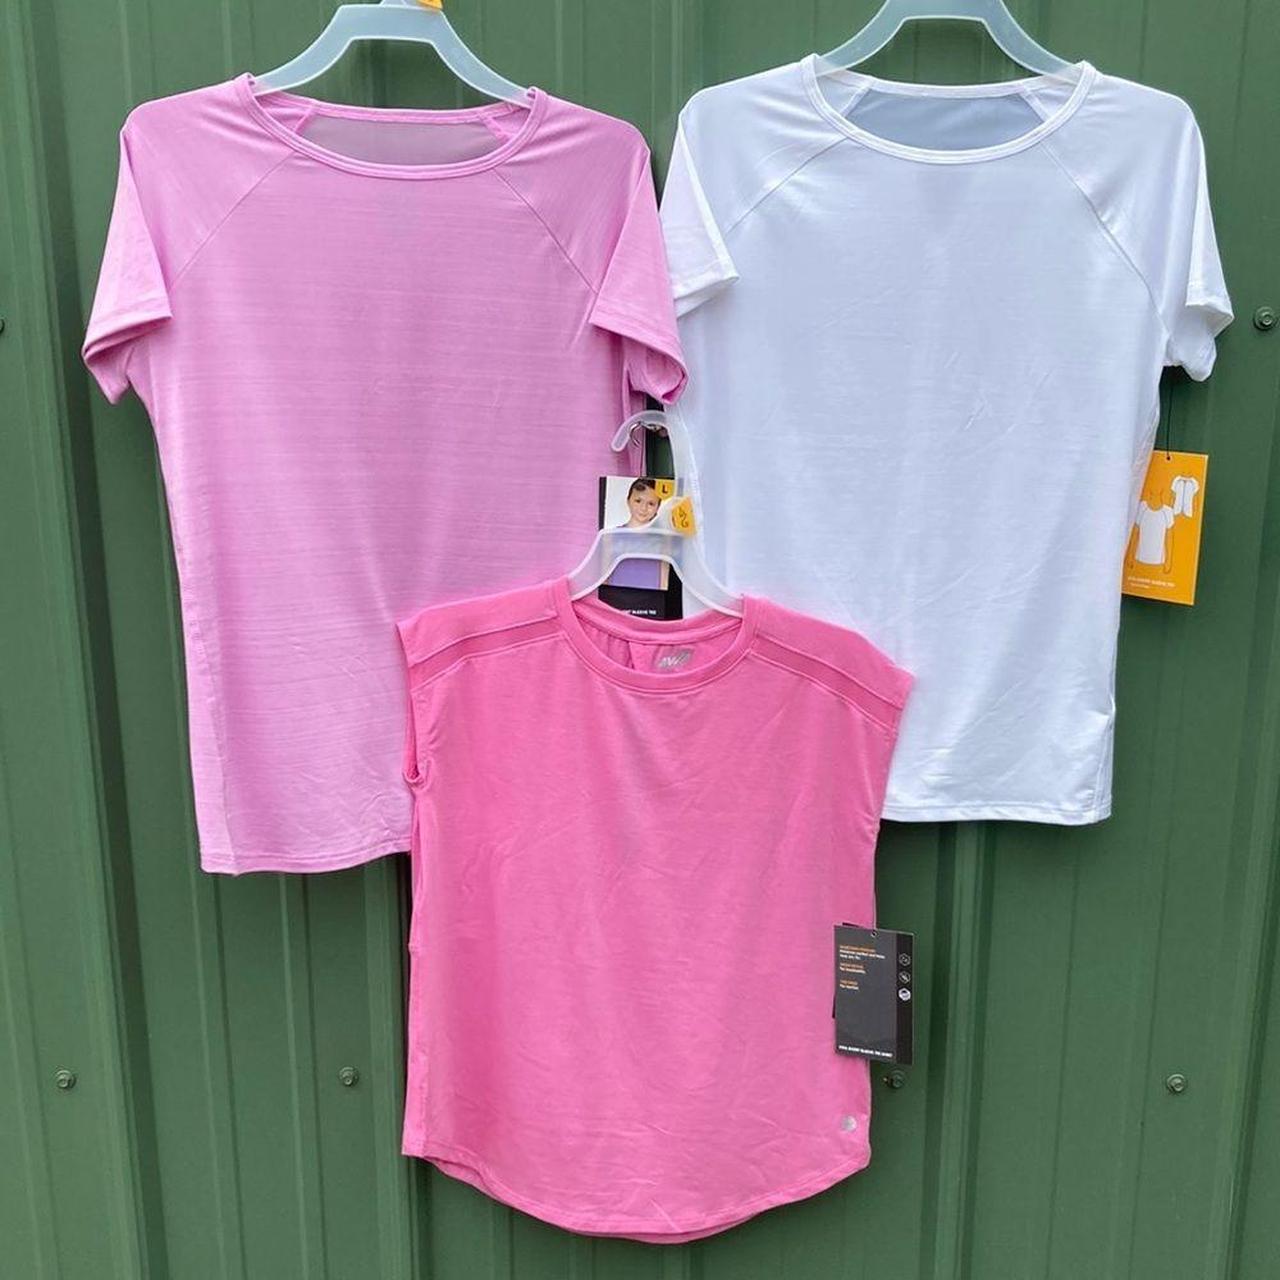 3 Girls Avia T-Shirts Size L 10/12 This listing is - Depop